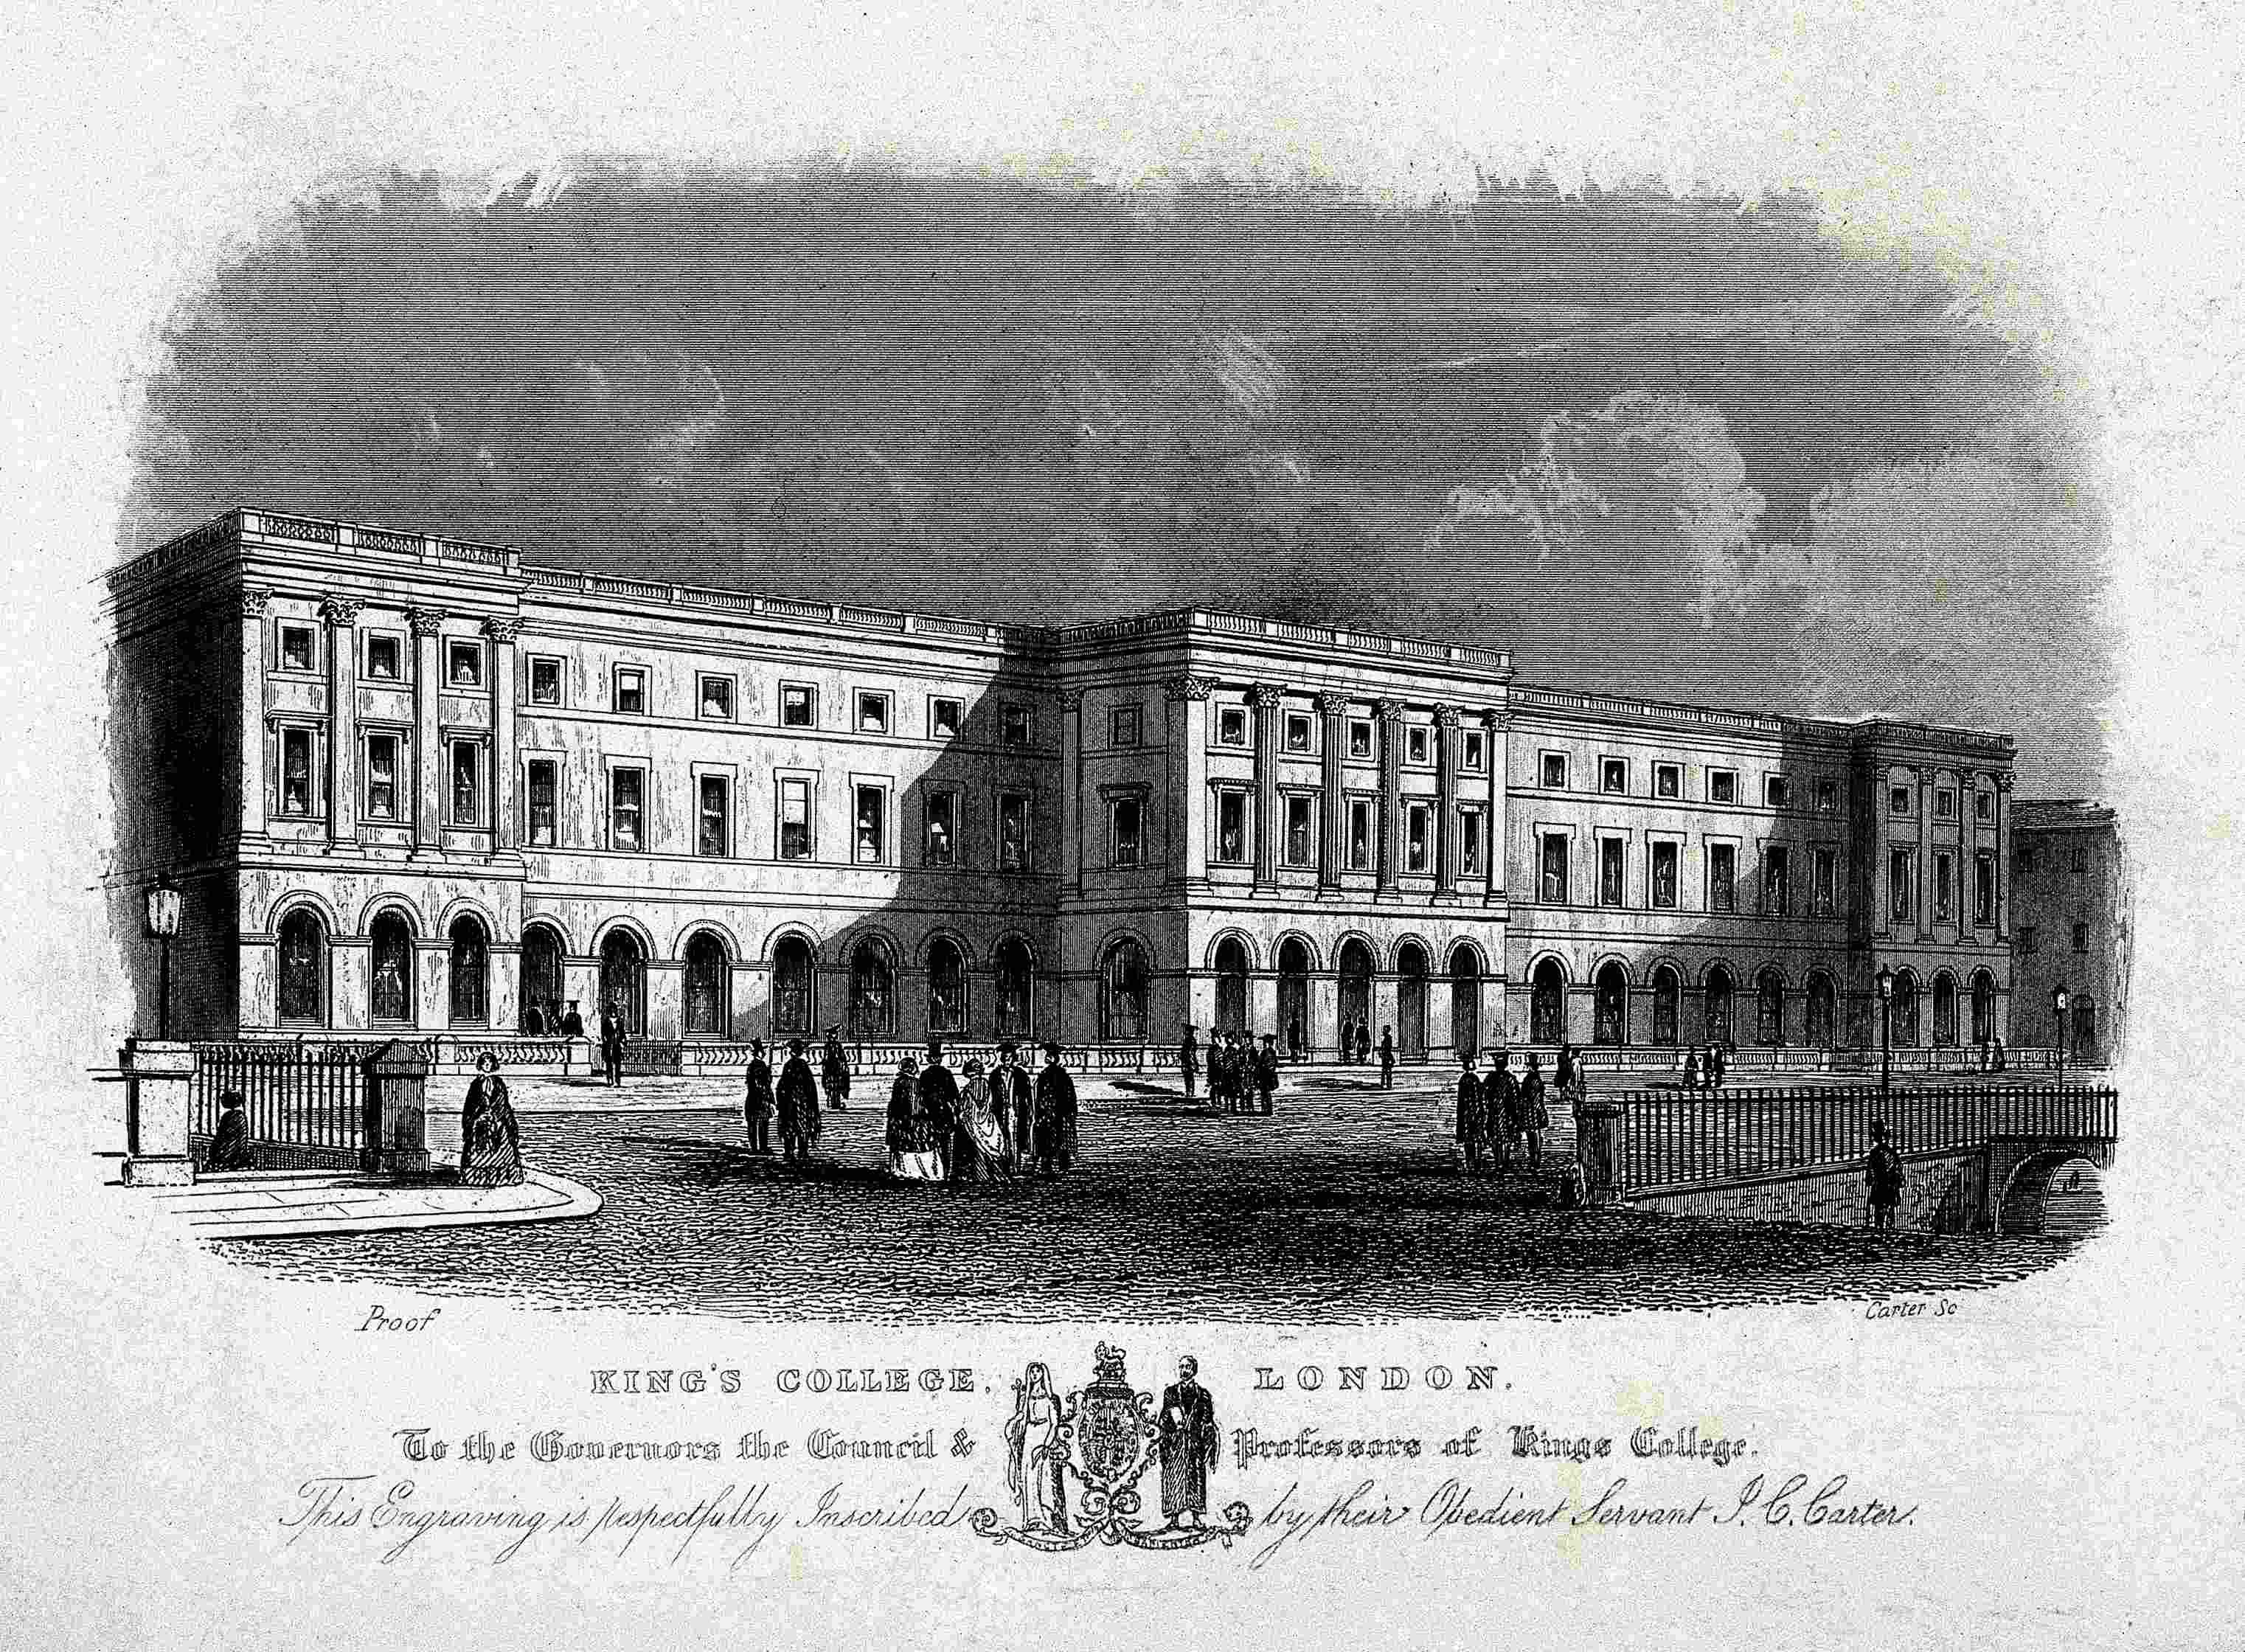 Historic drawing of King's College, Strand, London.